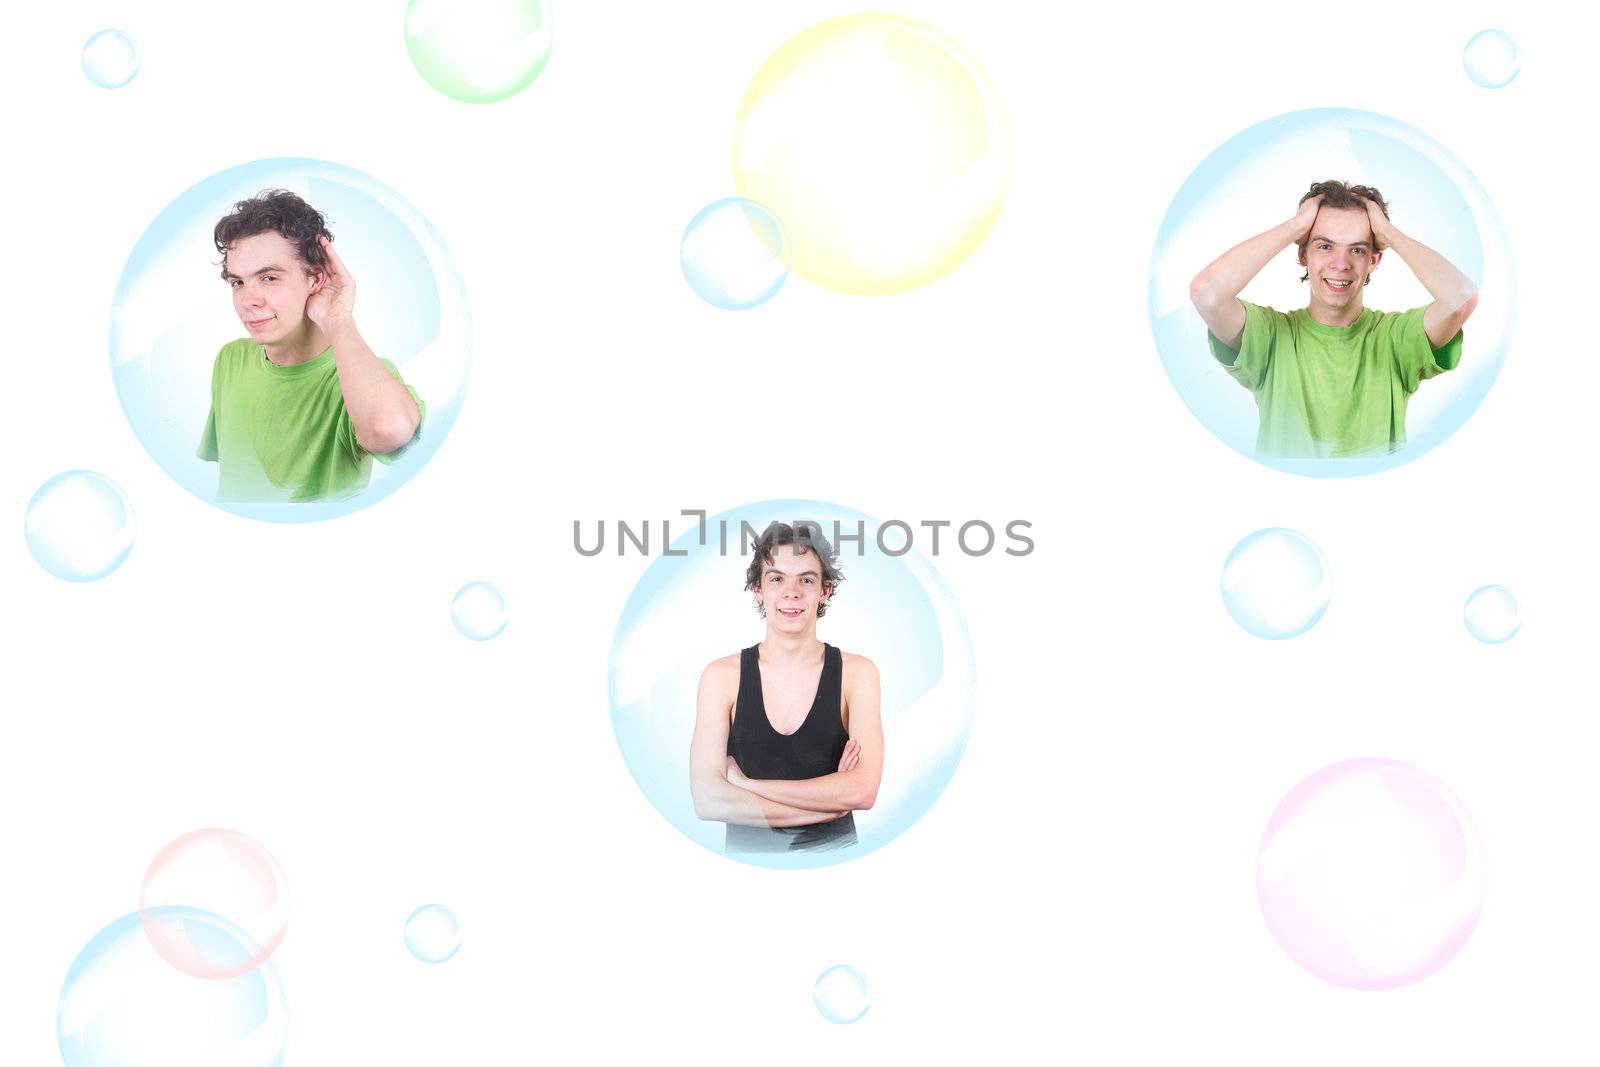 The boy and soap bubbles on a white background